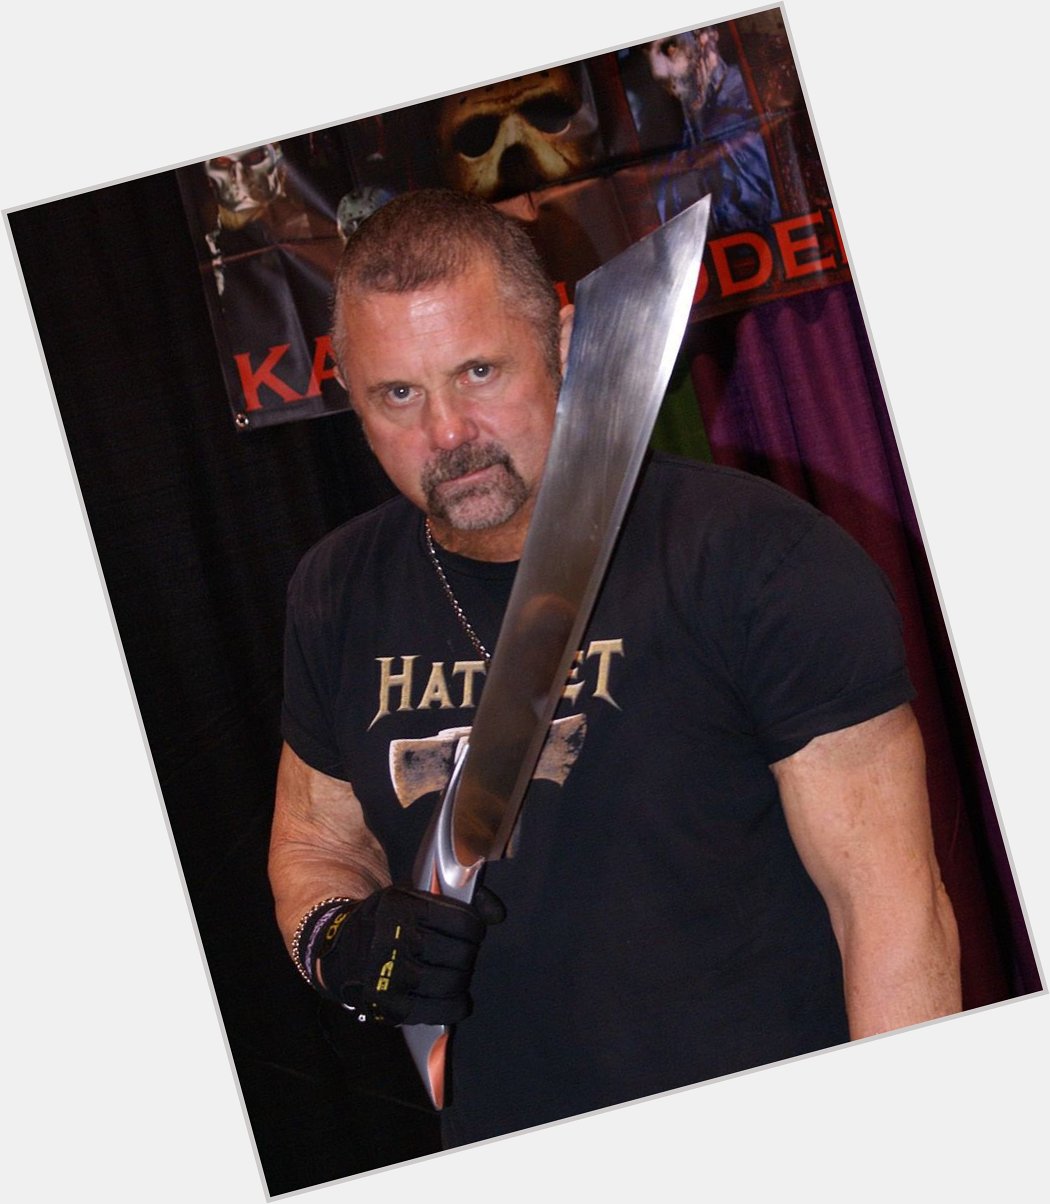 A happy birthday to Kane Hodder, where would slashers be without his contributions?? 